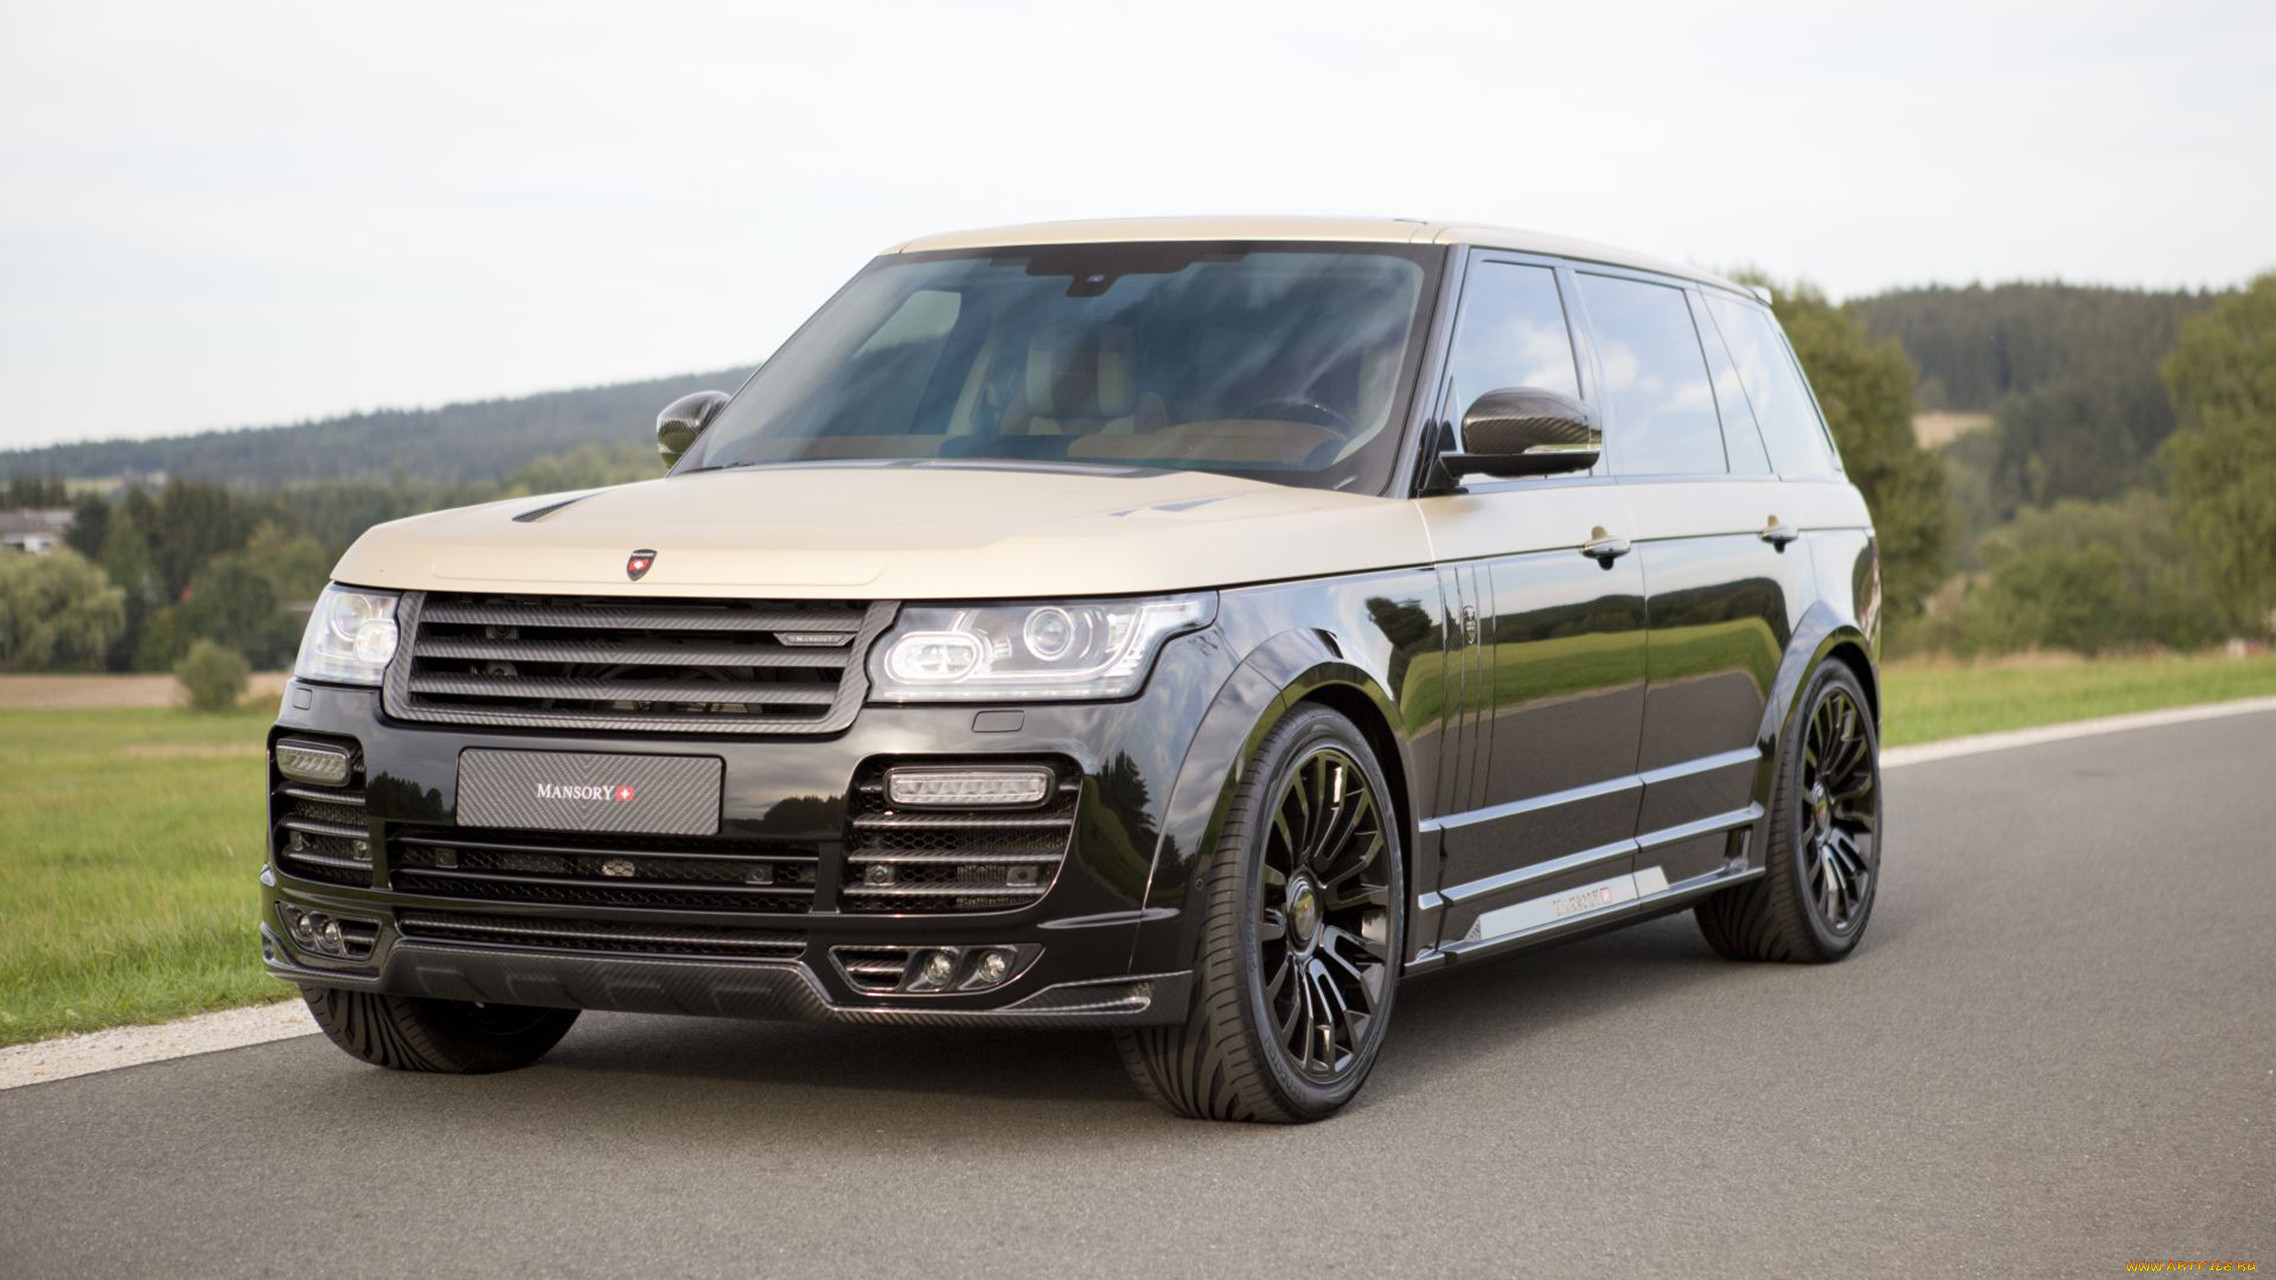 mansory range rover autobiography extended 2016, , range rover, 2016, extended, range, rover, mansory, autobiography